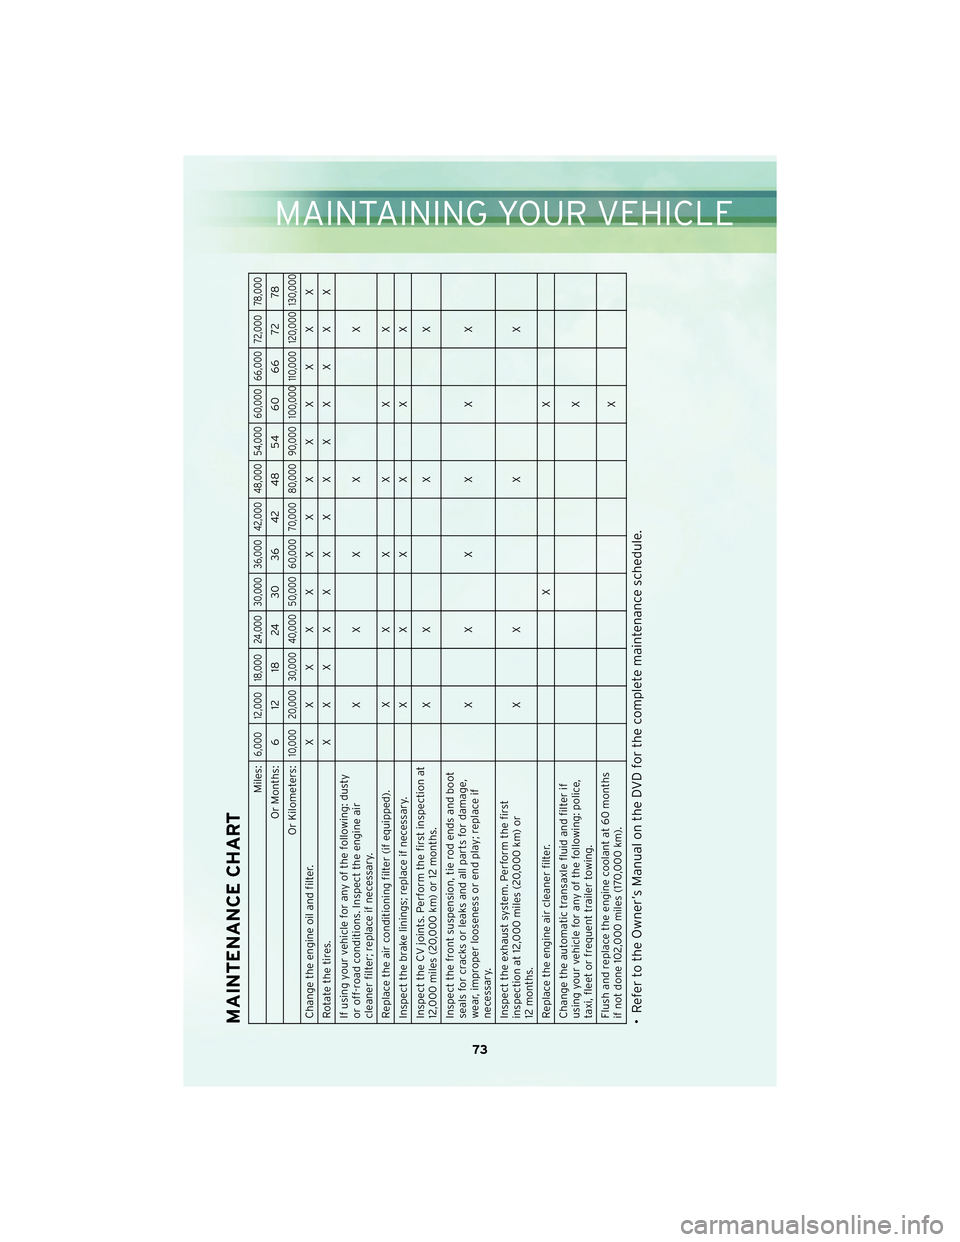 CHRYSLER TOWN AND COUNTRY 2010 5.G User Guide MAINTENANCE CHART
Miles:
6,000 12,000 18,000 24,000 30,000 36,000 42,000 48,000 54,000 60,000 66,000 72,000 78,000
Or Months: 6 12 18 24 30 36 42 48 54 60 66 72 78
Or Kilometers:
10,000 20,000 30,000 